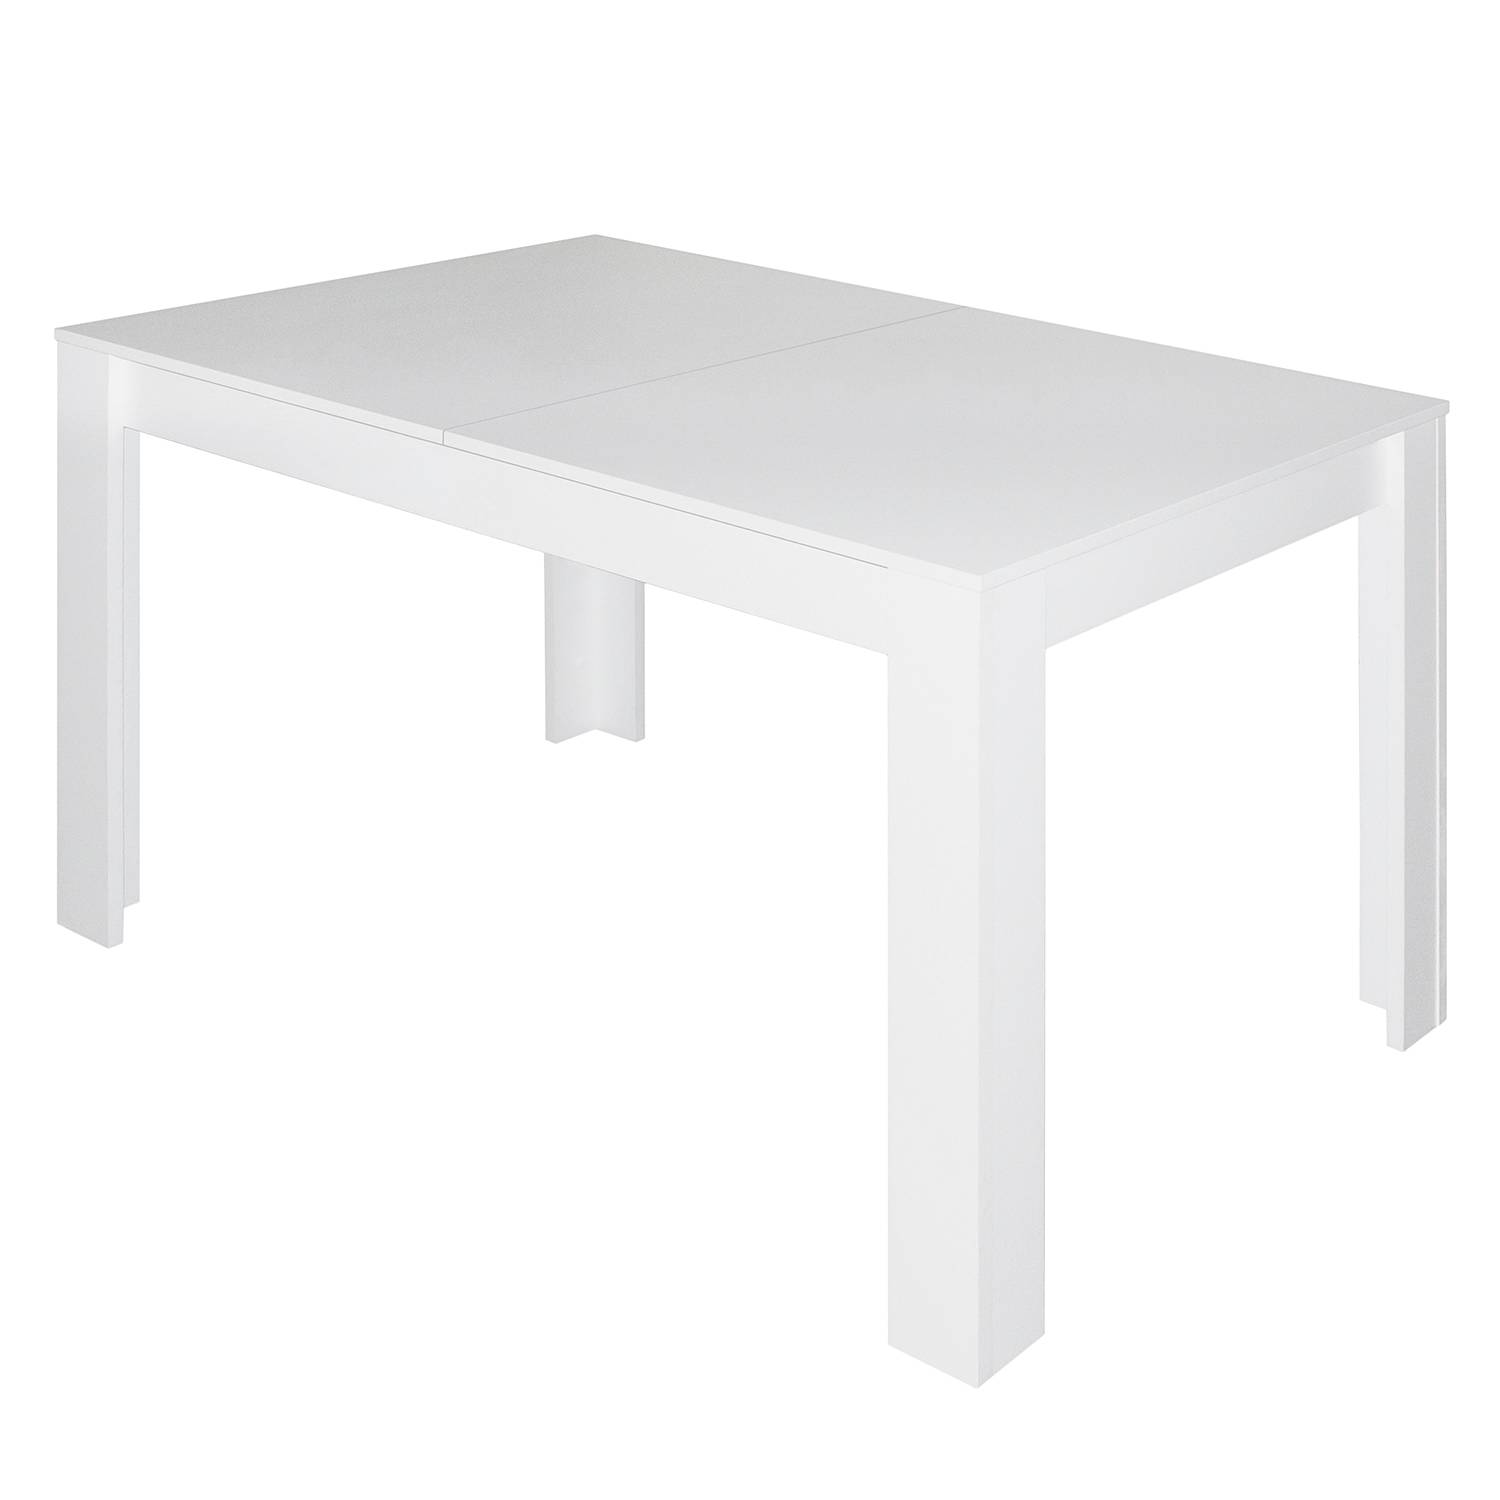 Image of Table extensible Fairford 000000001000121335